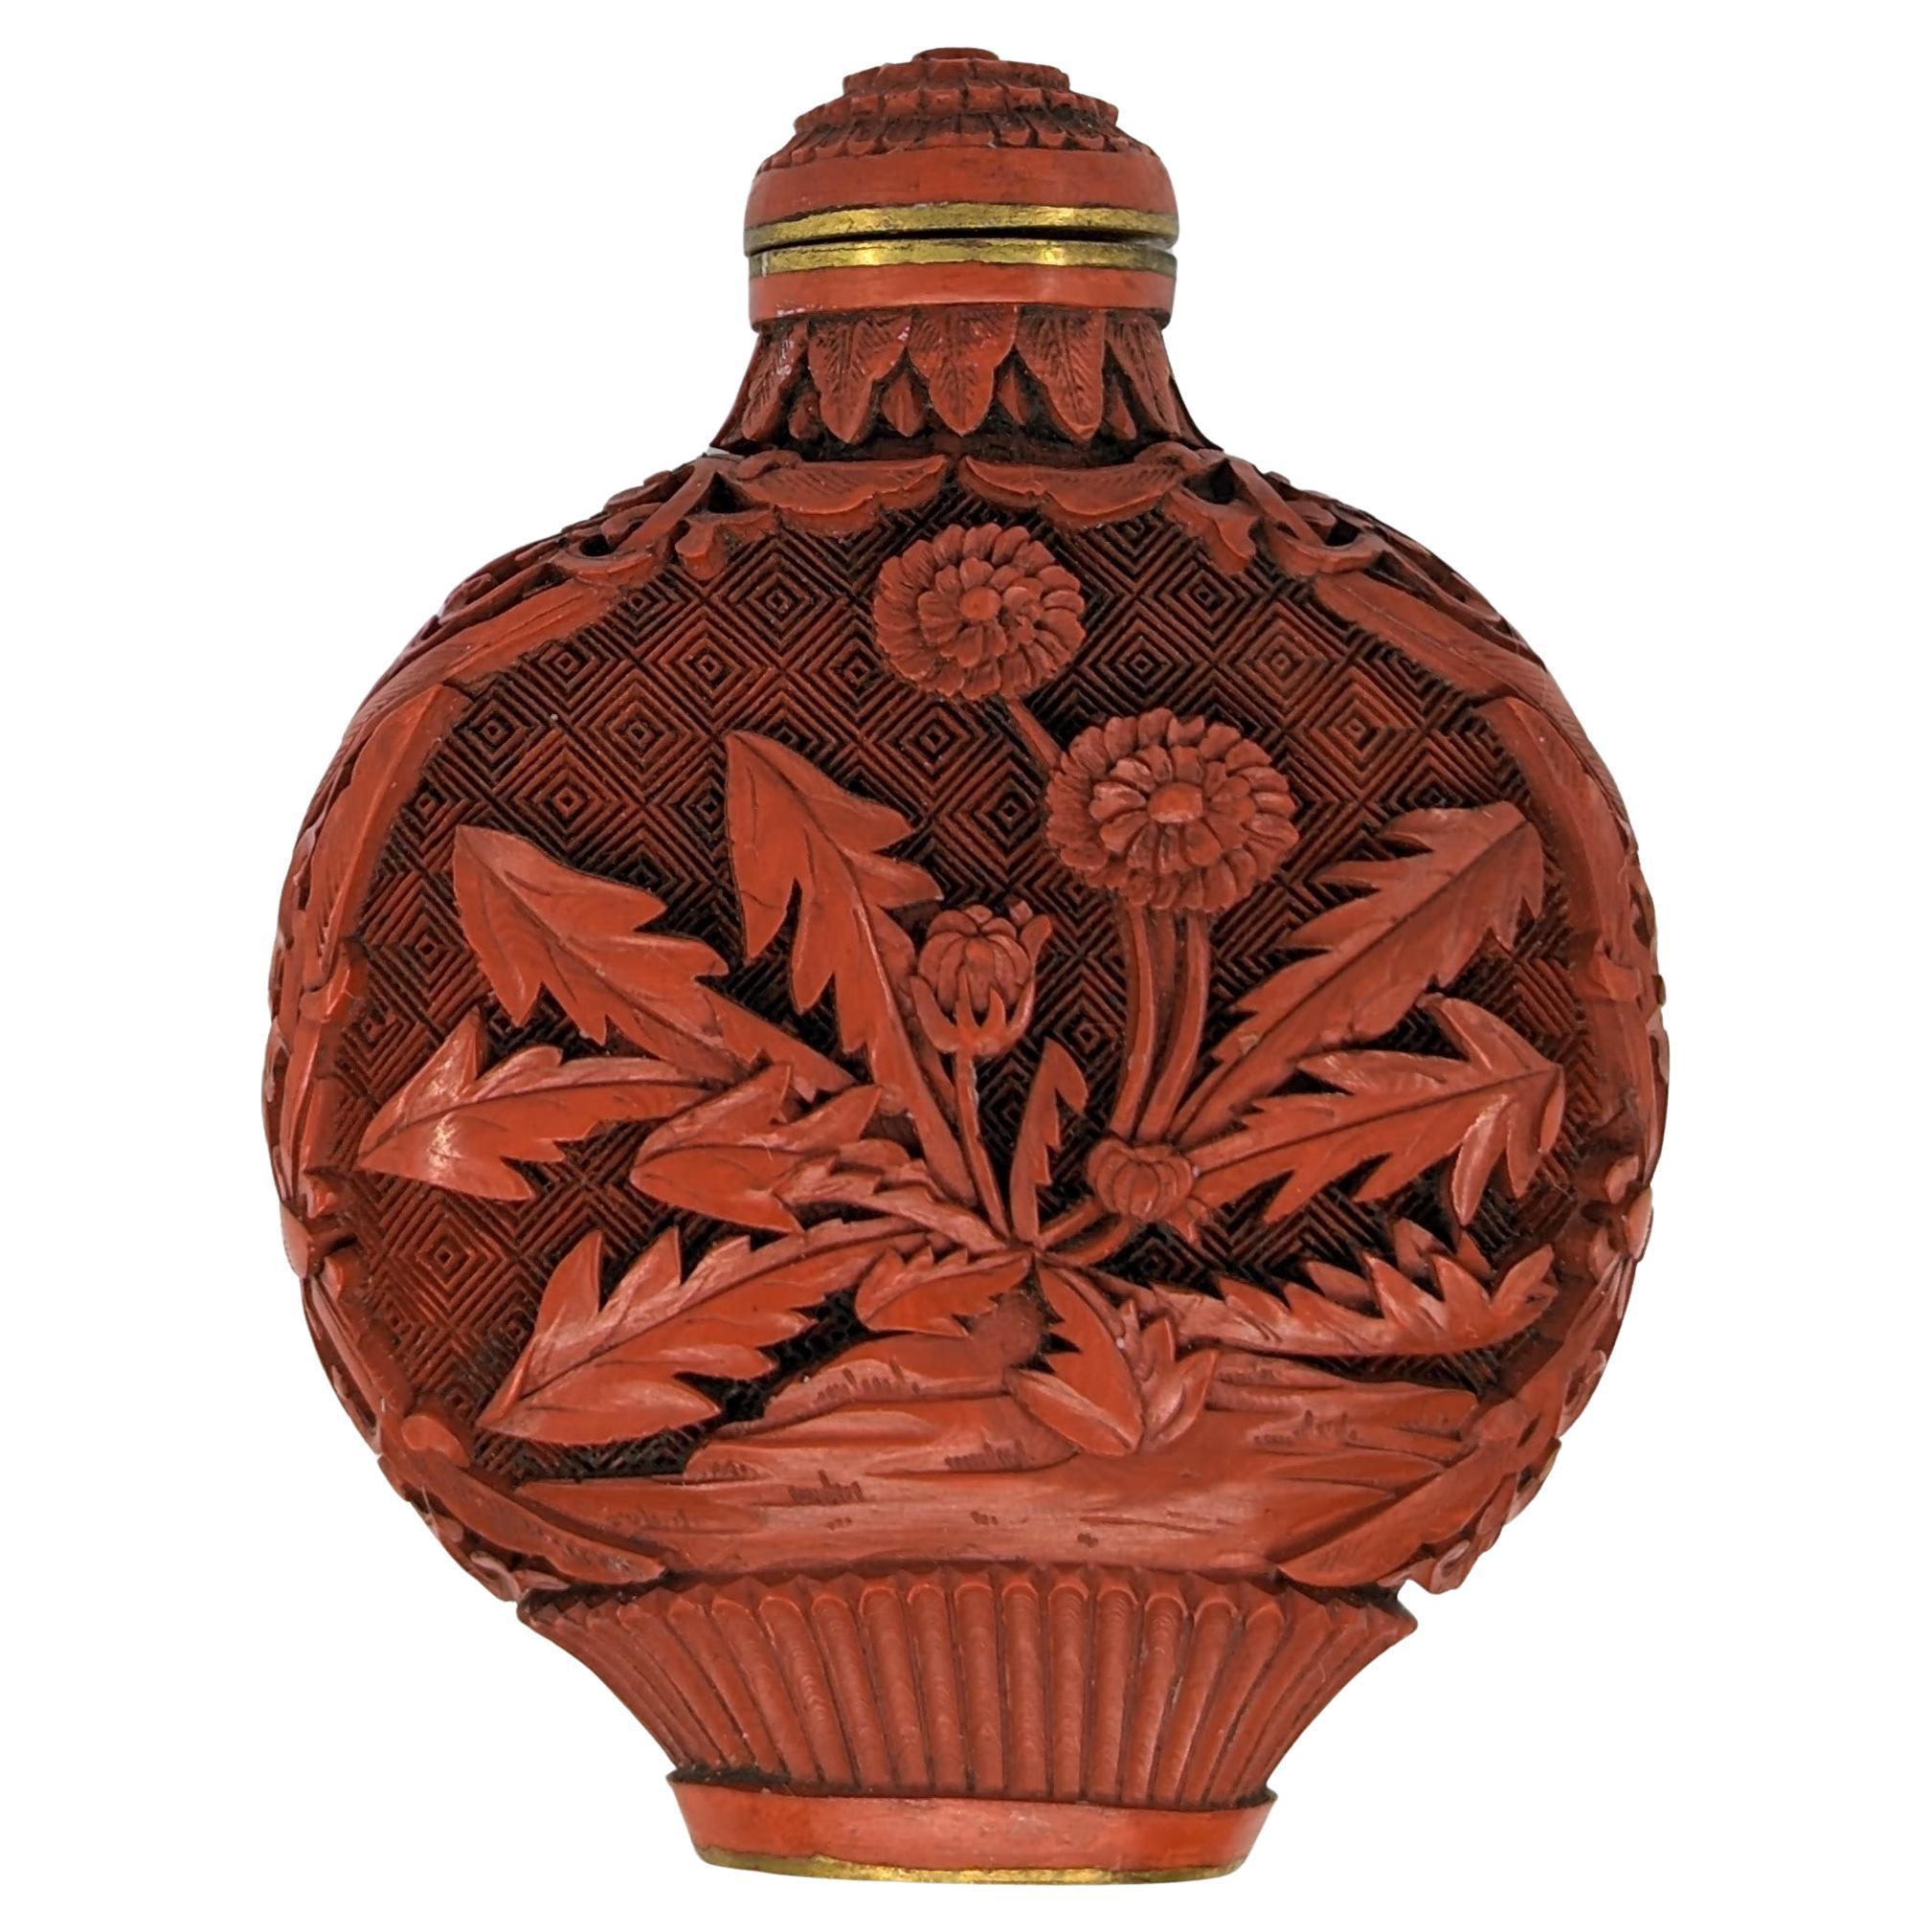 Antique Chinese Red Carved Cinnabar Snuff Bottle Chrysanthemum 18-19th Cent Qing